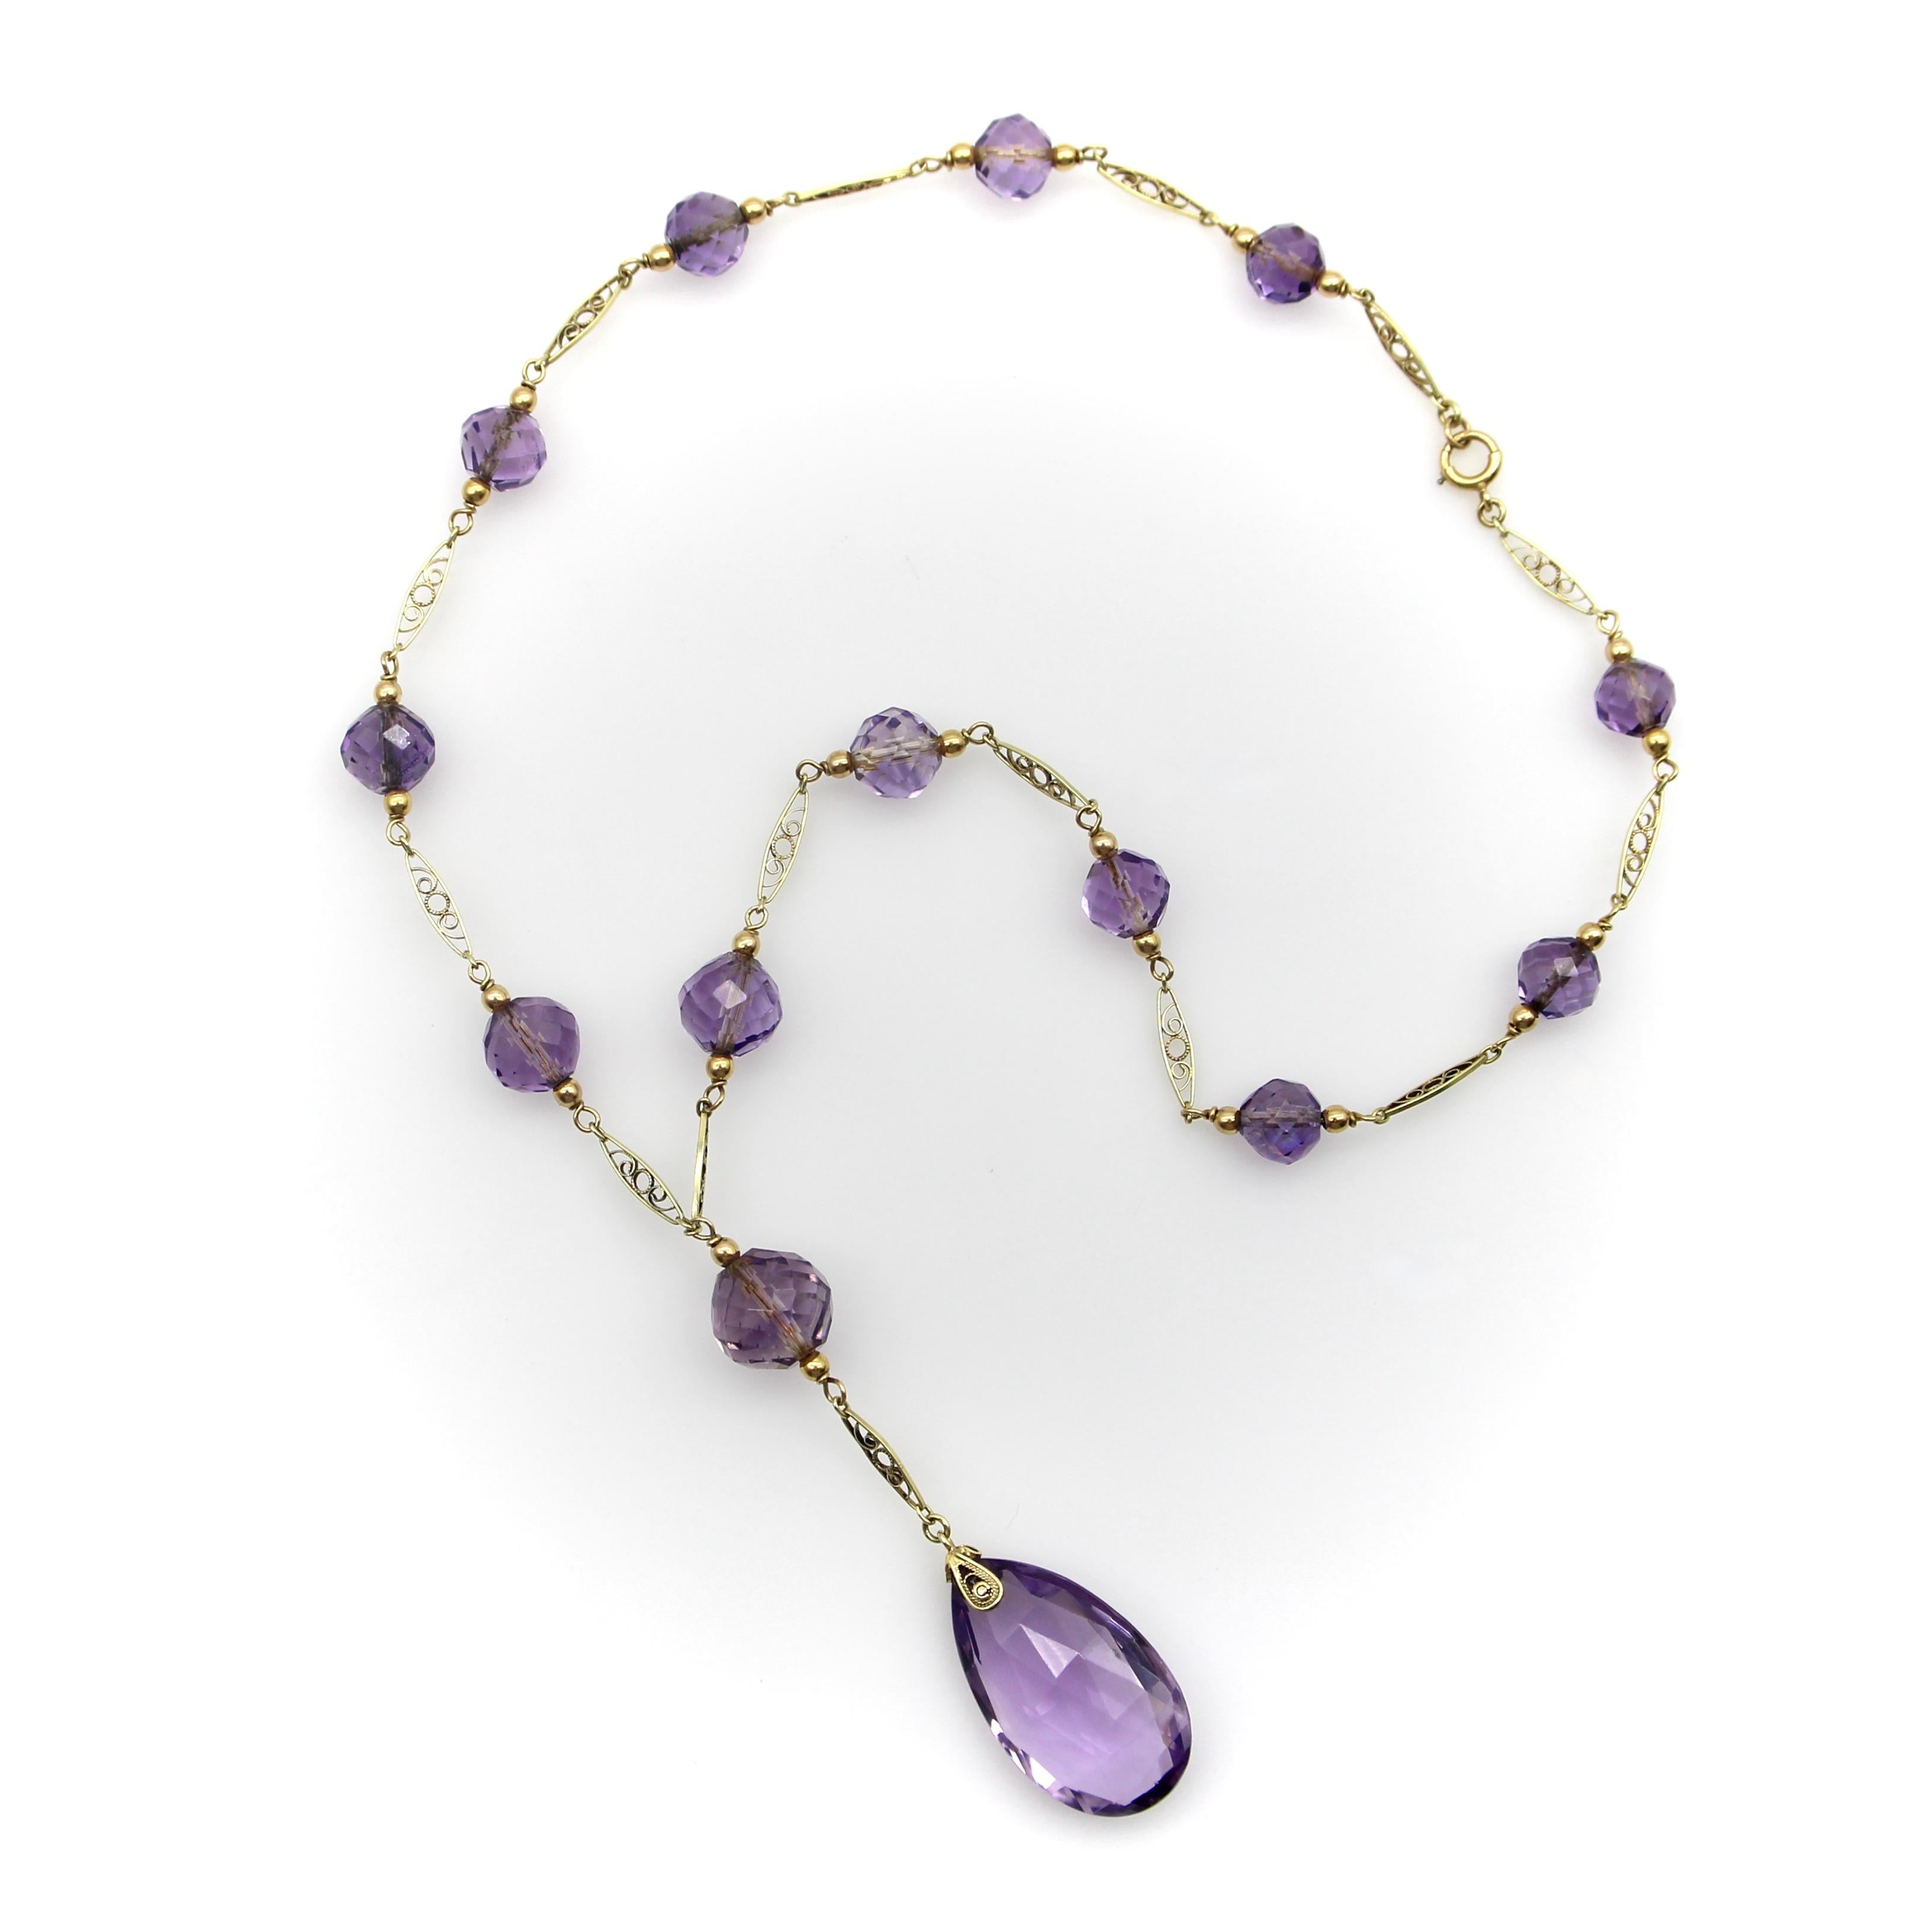 The hand faceted Rose de France amethyst beads in this 14k gold Edwardian necklace have stunning facets that catch the light like prisms. The center stone is a flattened teardrop-shaped briolette with elongated triangular facets. The round beads